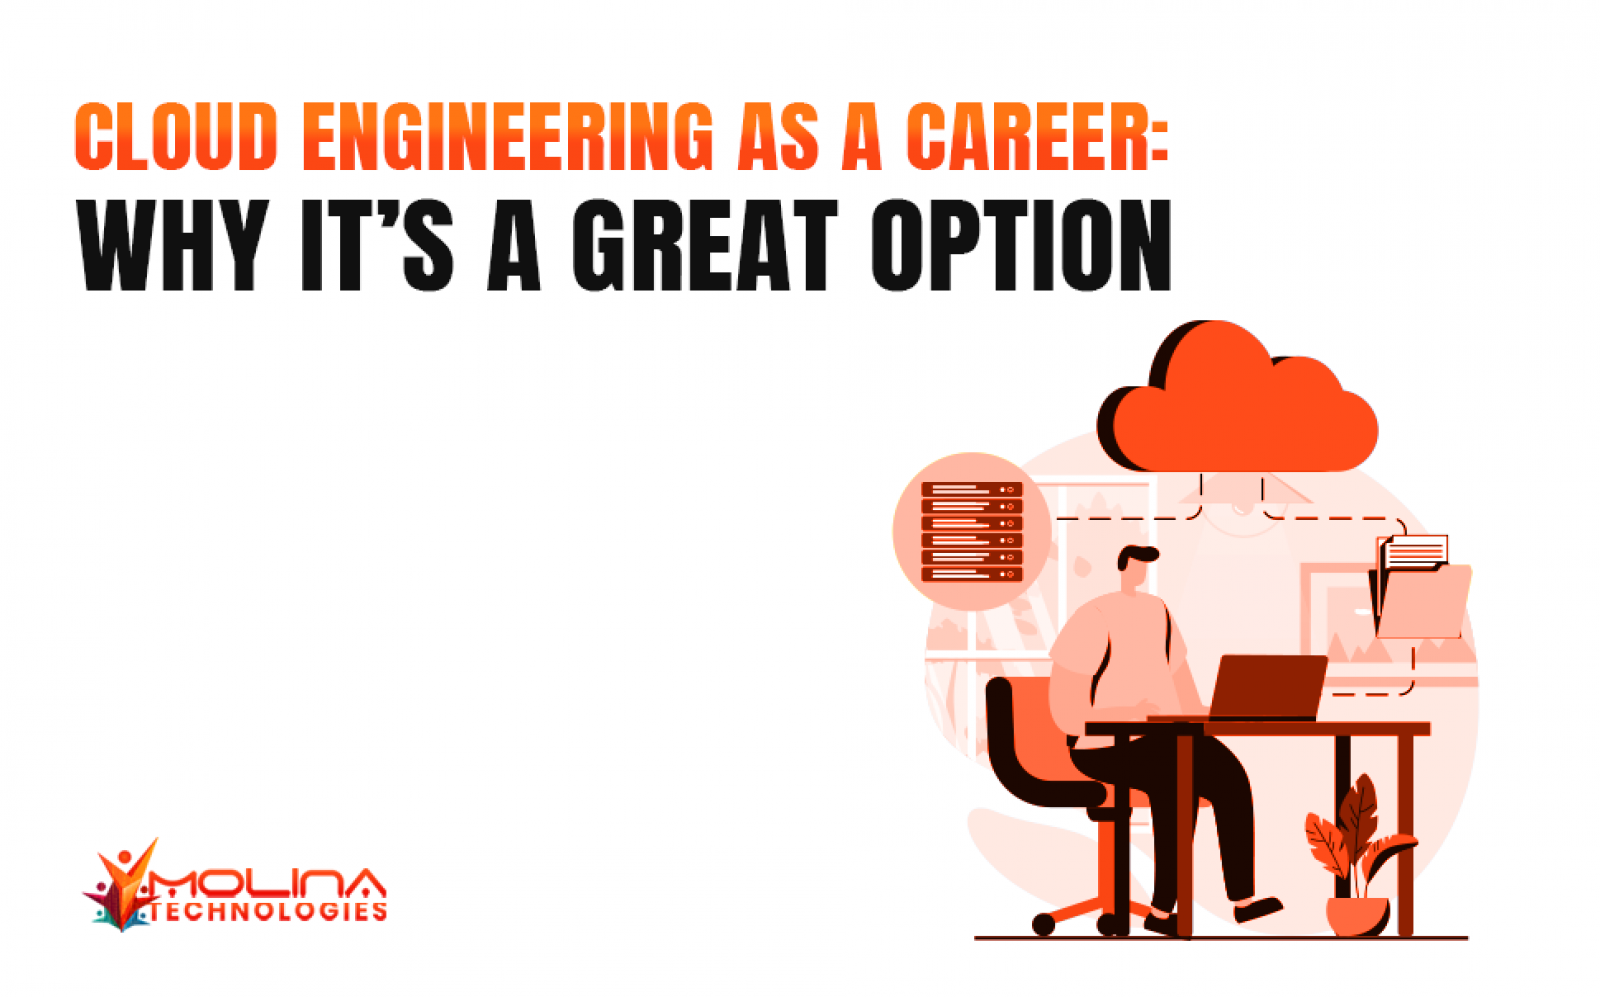 Why Cloud Engineering is the Career of the Future